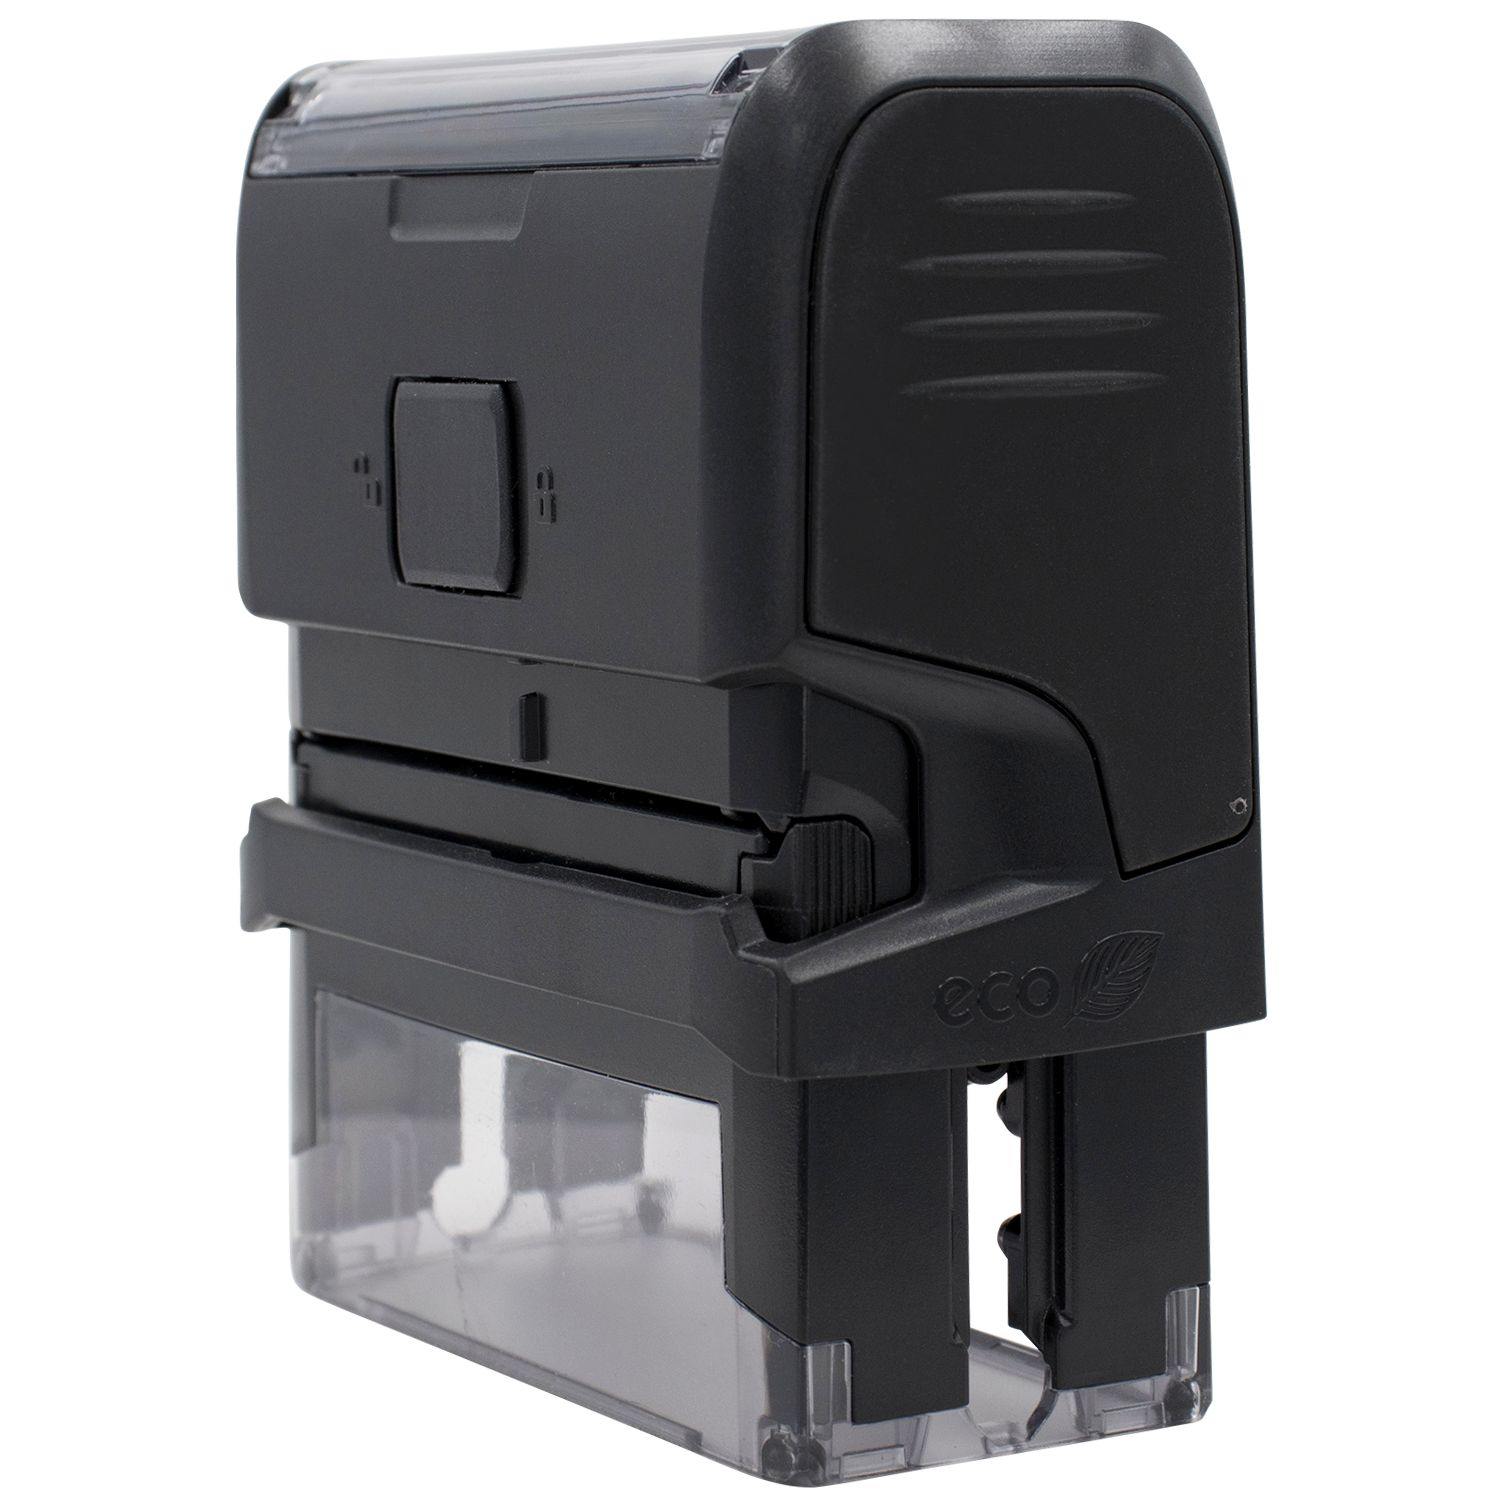 Large Self-Inking First Class Mail International Stamp - Engineer Seal Stamps - Brand_Trodat, Impression Size_Large, Stamp Type_Self-Inking Stamp, Type of Use_Postal & Mailing